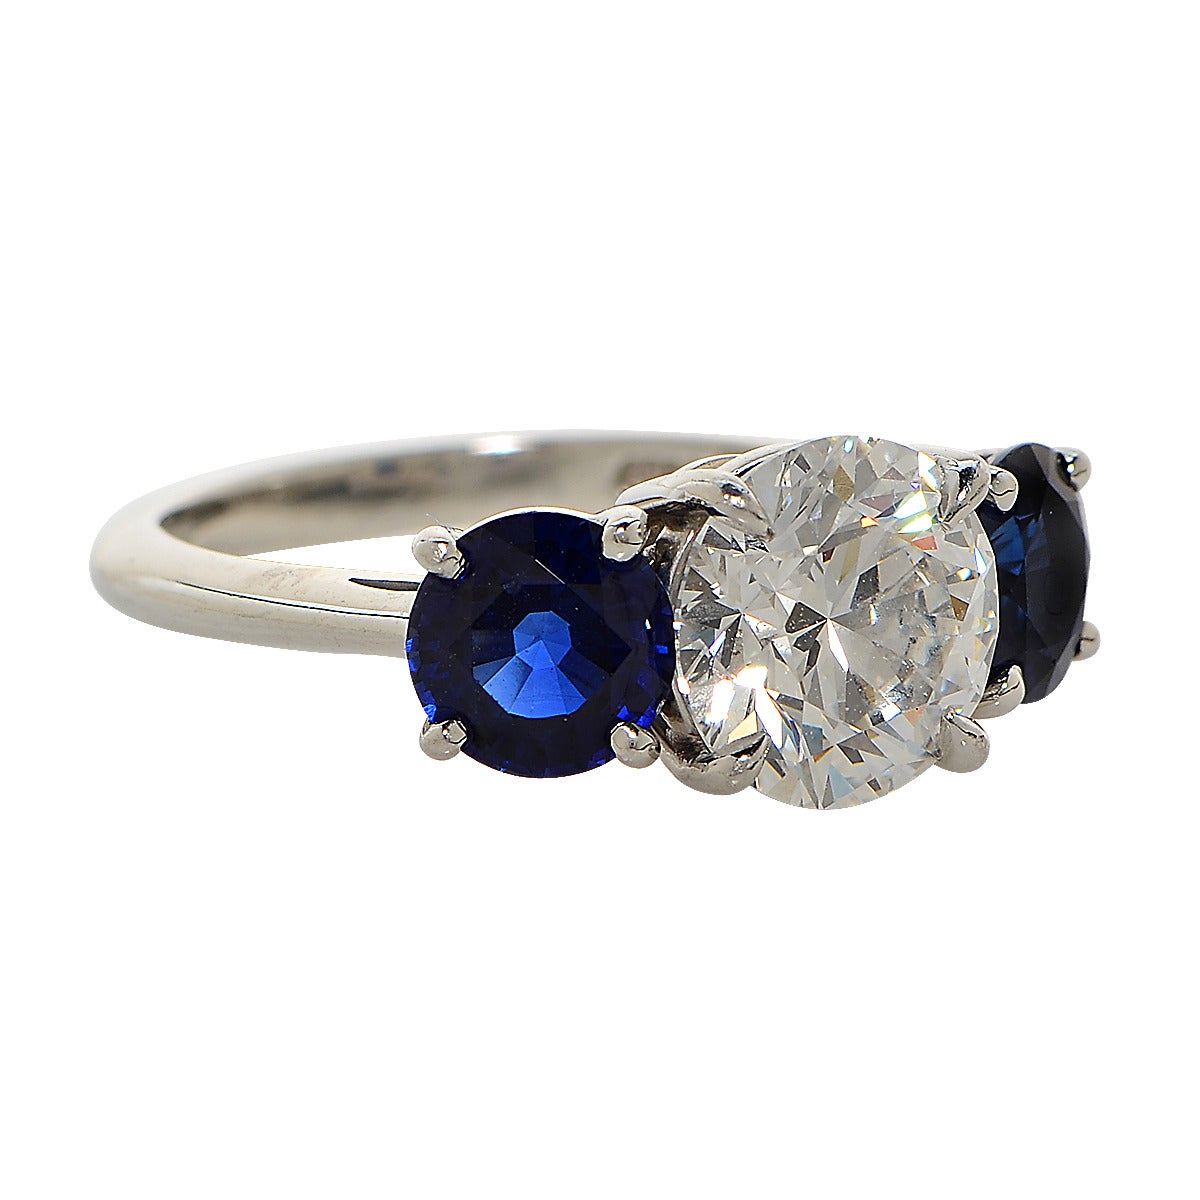 Tiffany & Co. Platinum Ring with a 2.35ct E/VS1 Round Brilliant Cut Diamond, also Accompanied by a GIA Certificate, Flanked by two Royal Blue Sapphires Weighing 2.22ct Total.